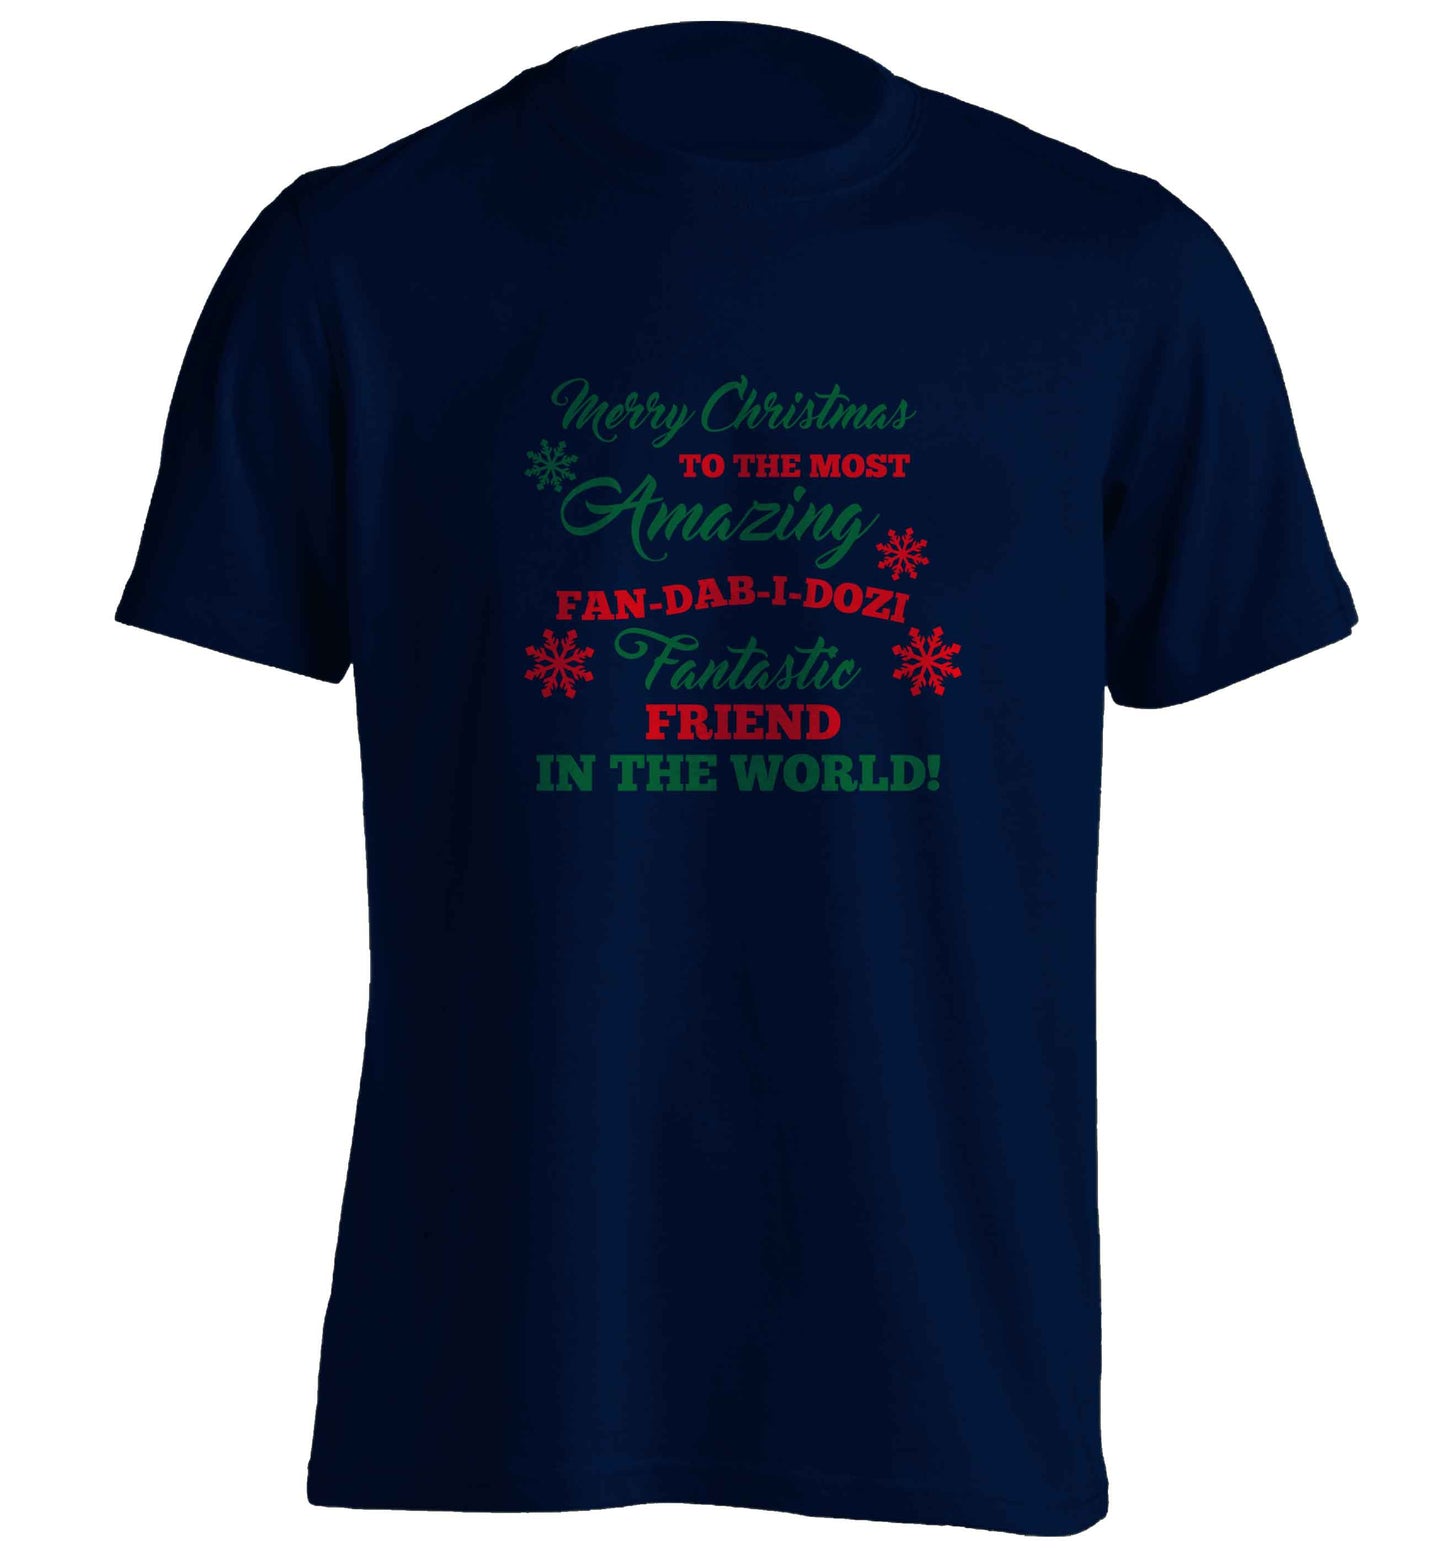 Merry Christmas to the most amazing fan-dab-i-dozi fantasic friend in the world adults unisex navy Tshirt 2XL